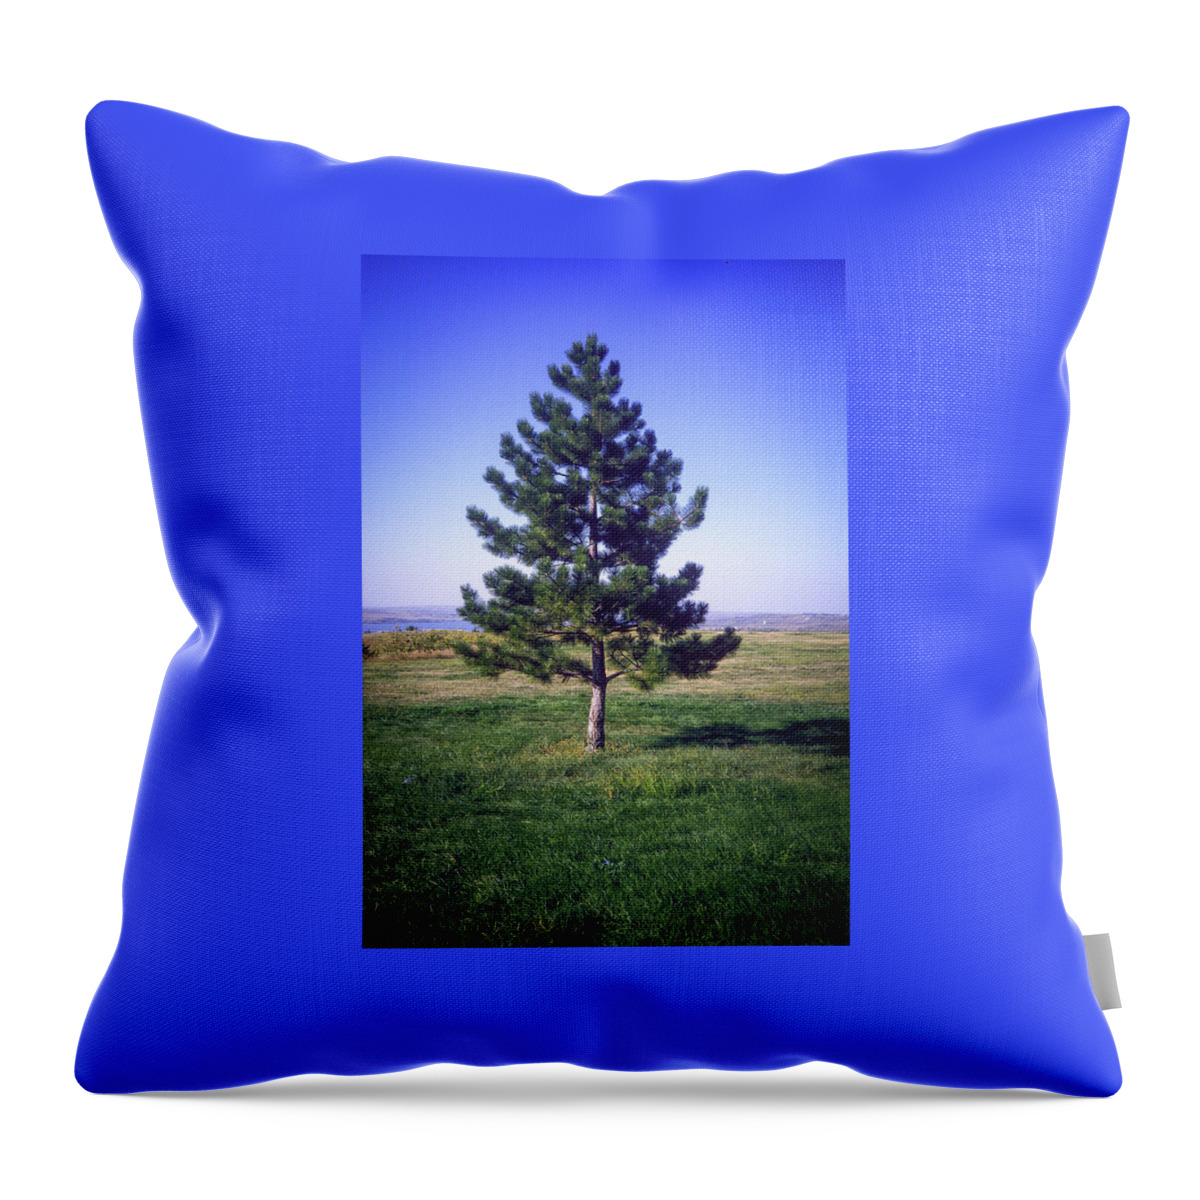 Solitary Throw Pillow featuring the photograph Solitary Pine by Gordon James